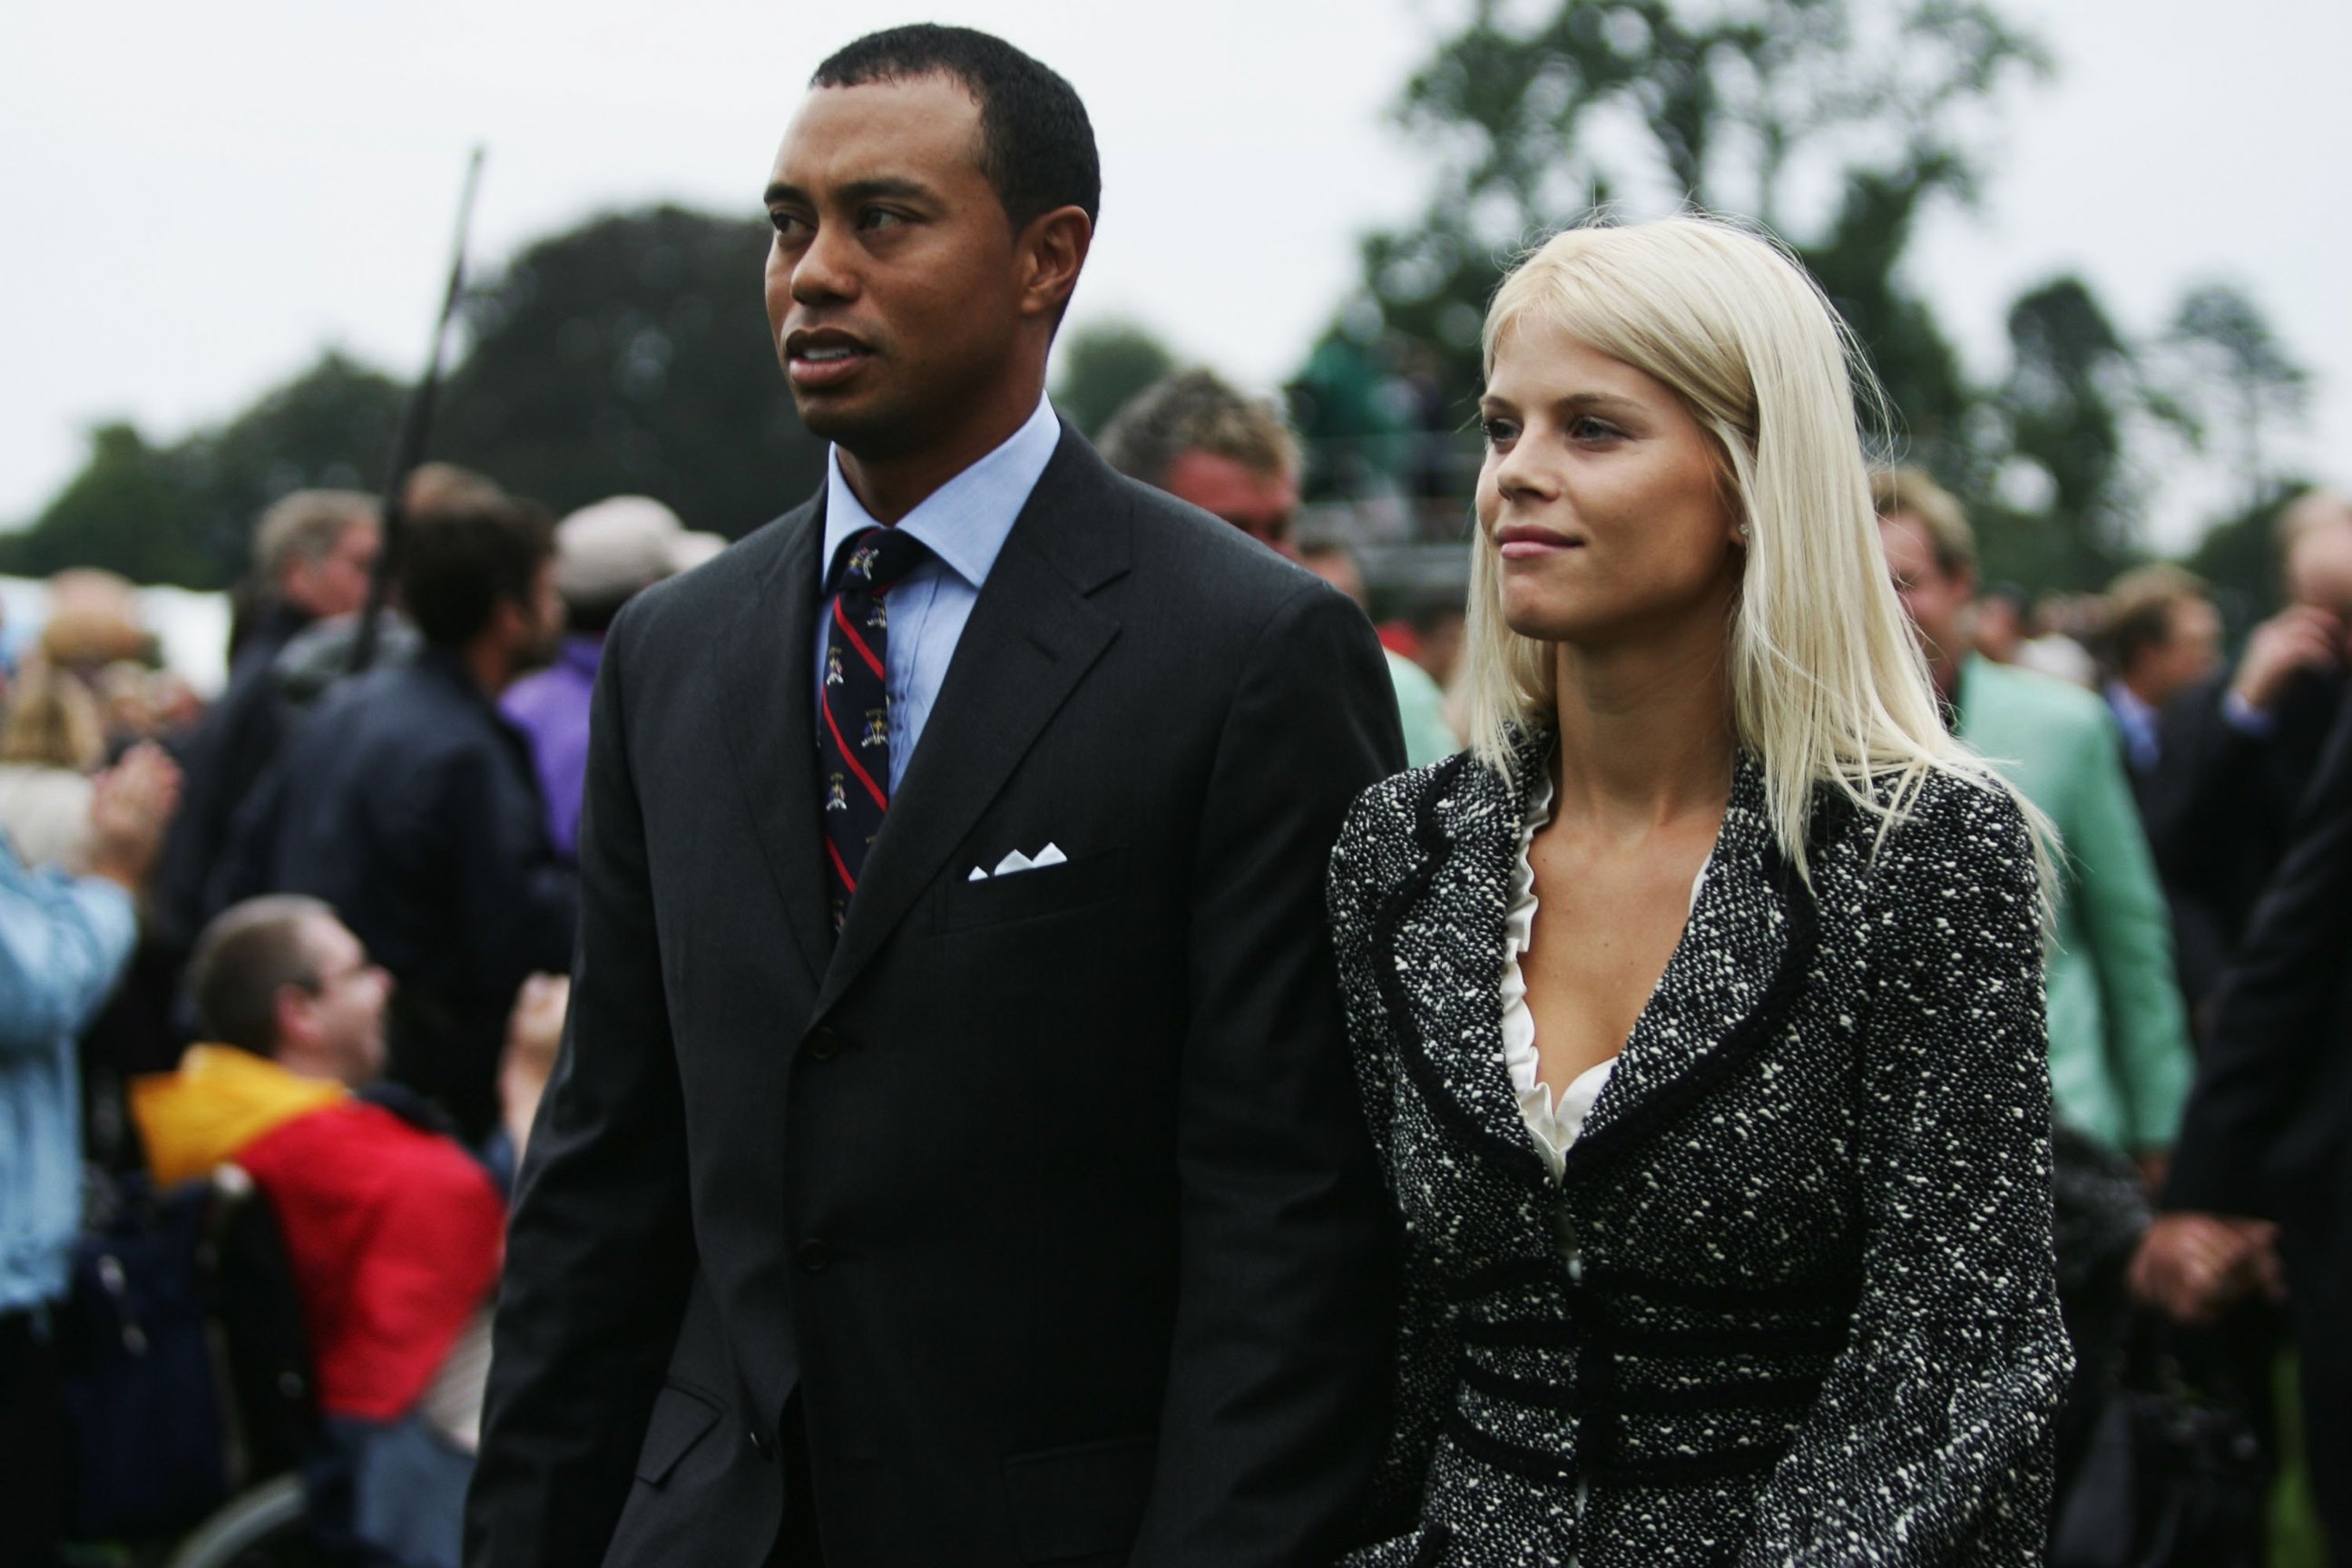 PHOTO: Tiger Woods and his wife Elin look on during the Opening Ceremony of the 2006 Ryder Cup at The K Club, Sept. 21, 2006, in Straffan, Co. Kildare, Ireland.